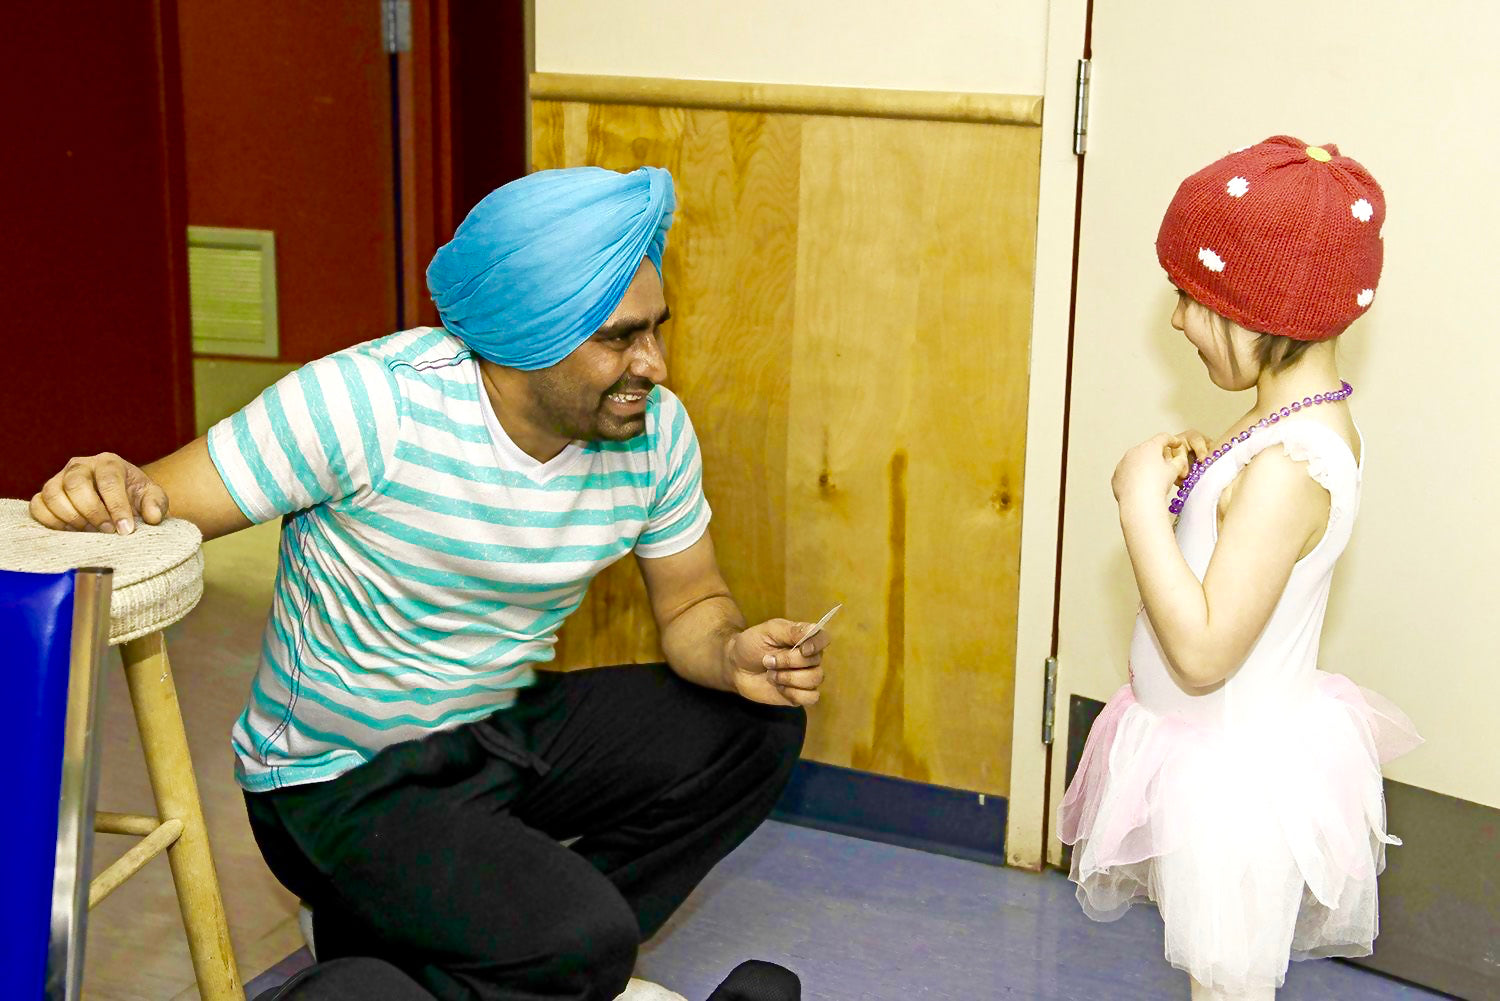 In 2013, while Gurdeep was teaching Bhangra dance lessons in the Francophone building in Whitehorse, a student offered Gurdeep a token of thanks.